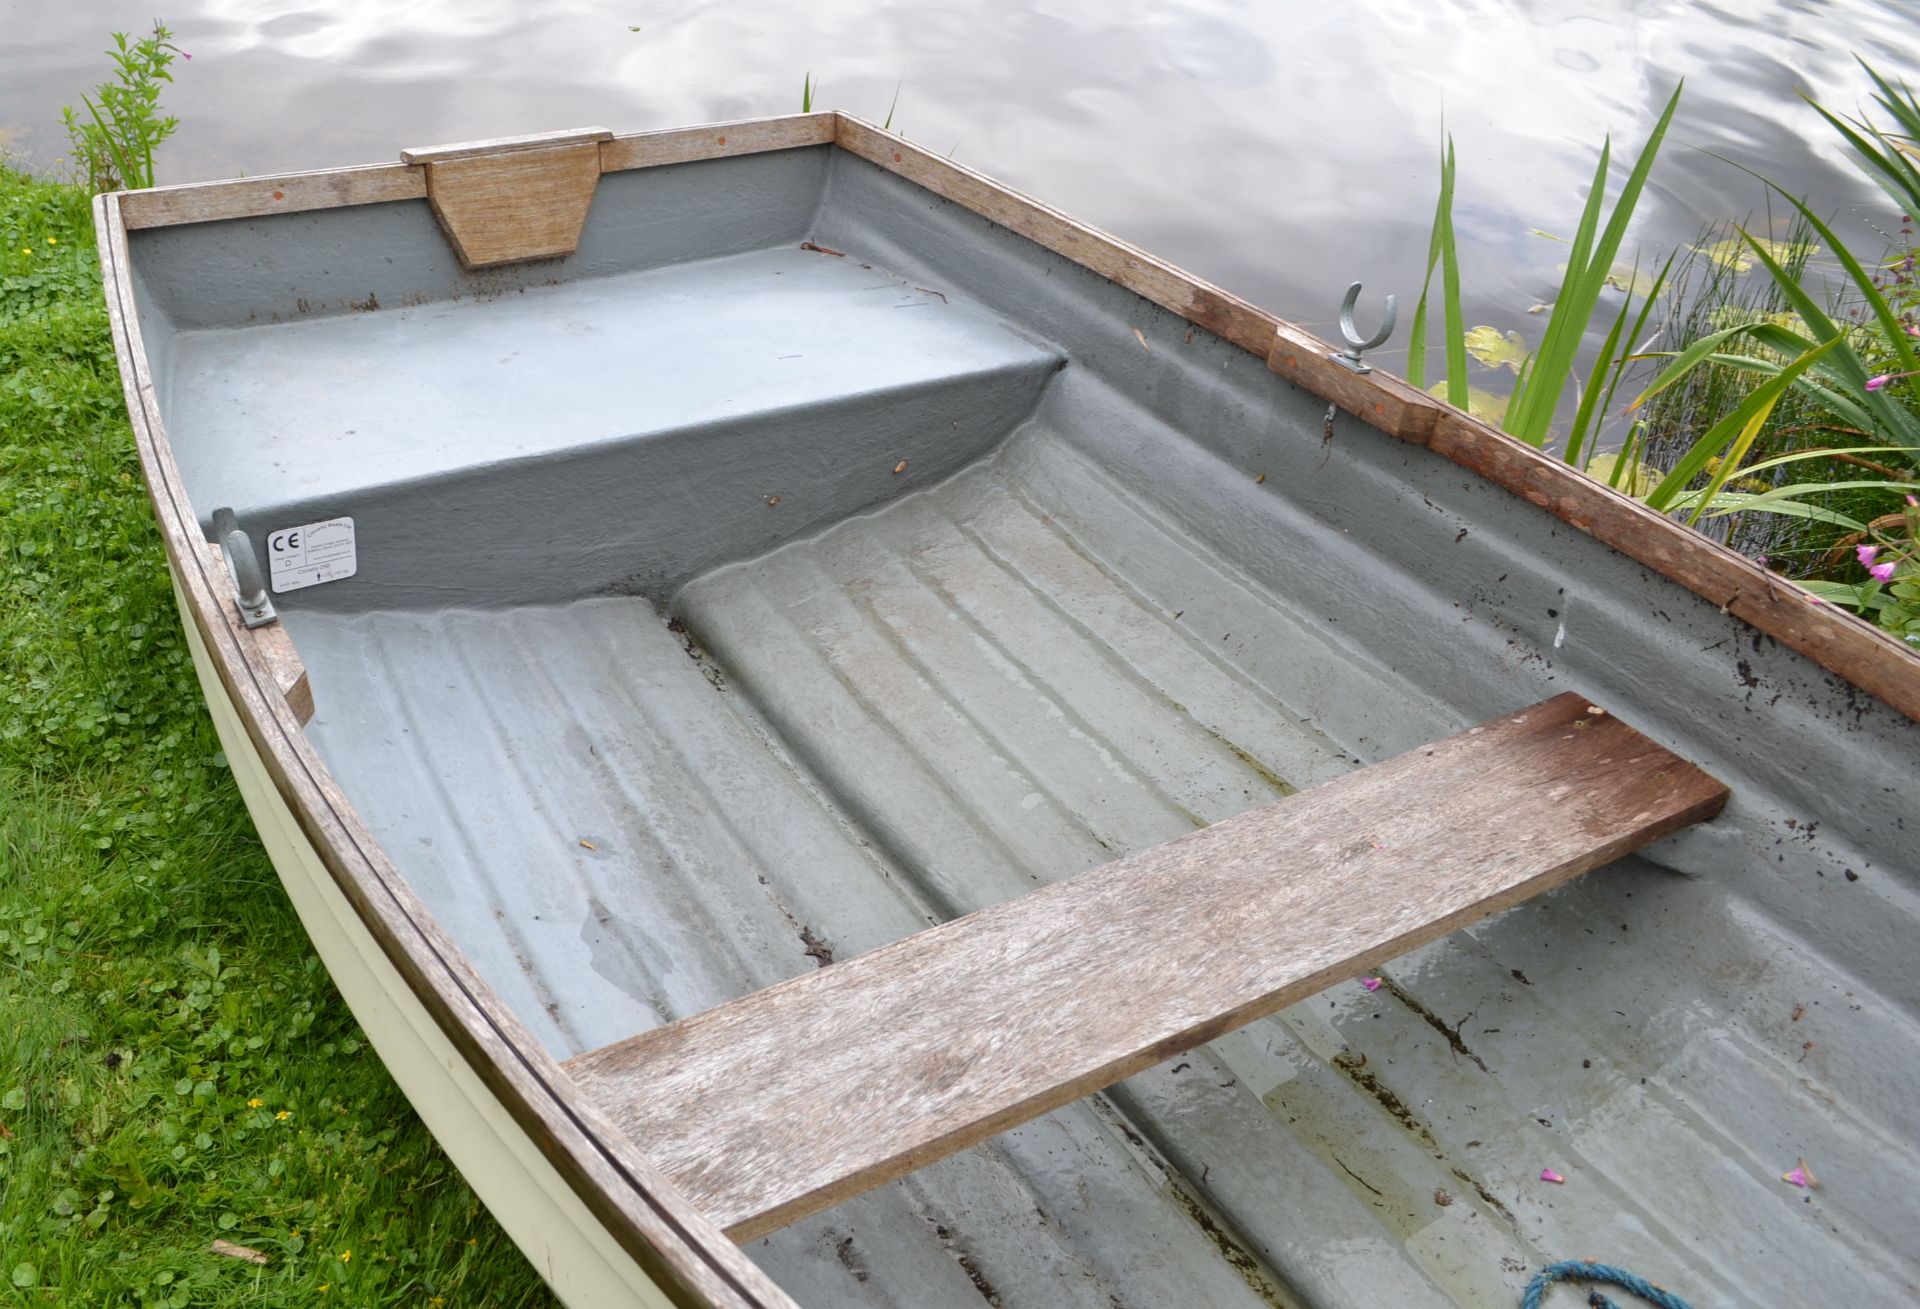 1 x Clovelly 290 Glass Fibre Rowing Boat - 240Kg Maximum Load - CL226 - Location: Knutsford WA16 - Image 13 of 15